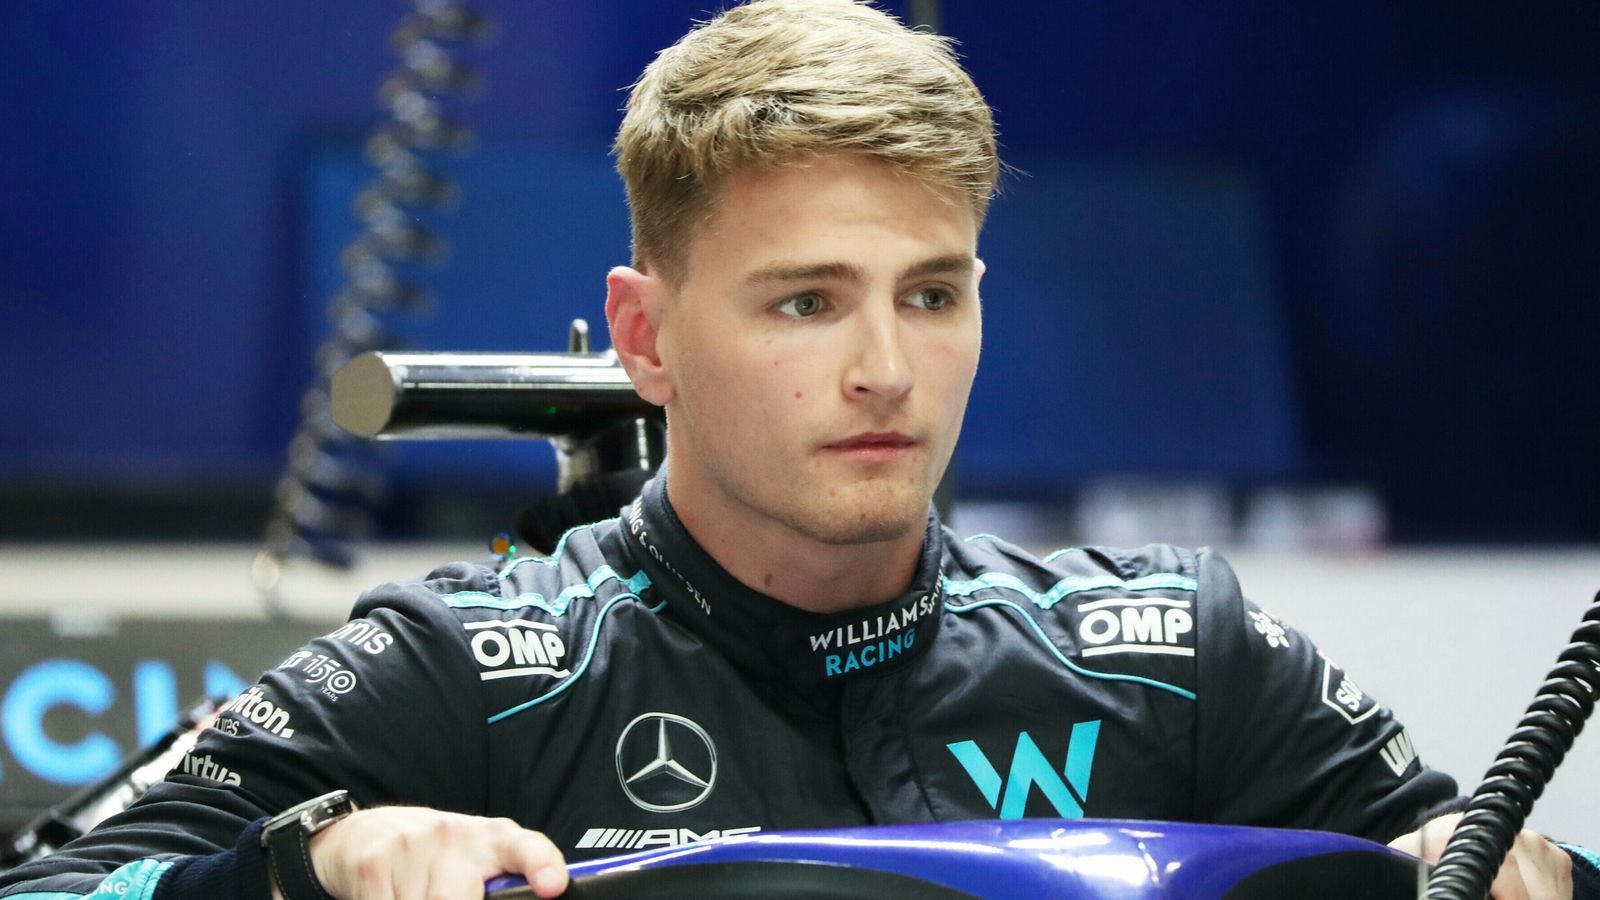 Williams’ Logan Sargeant ready for pressure as American in F1 | ‘The expectations are high’